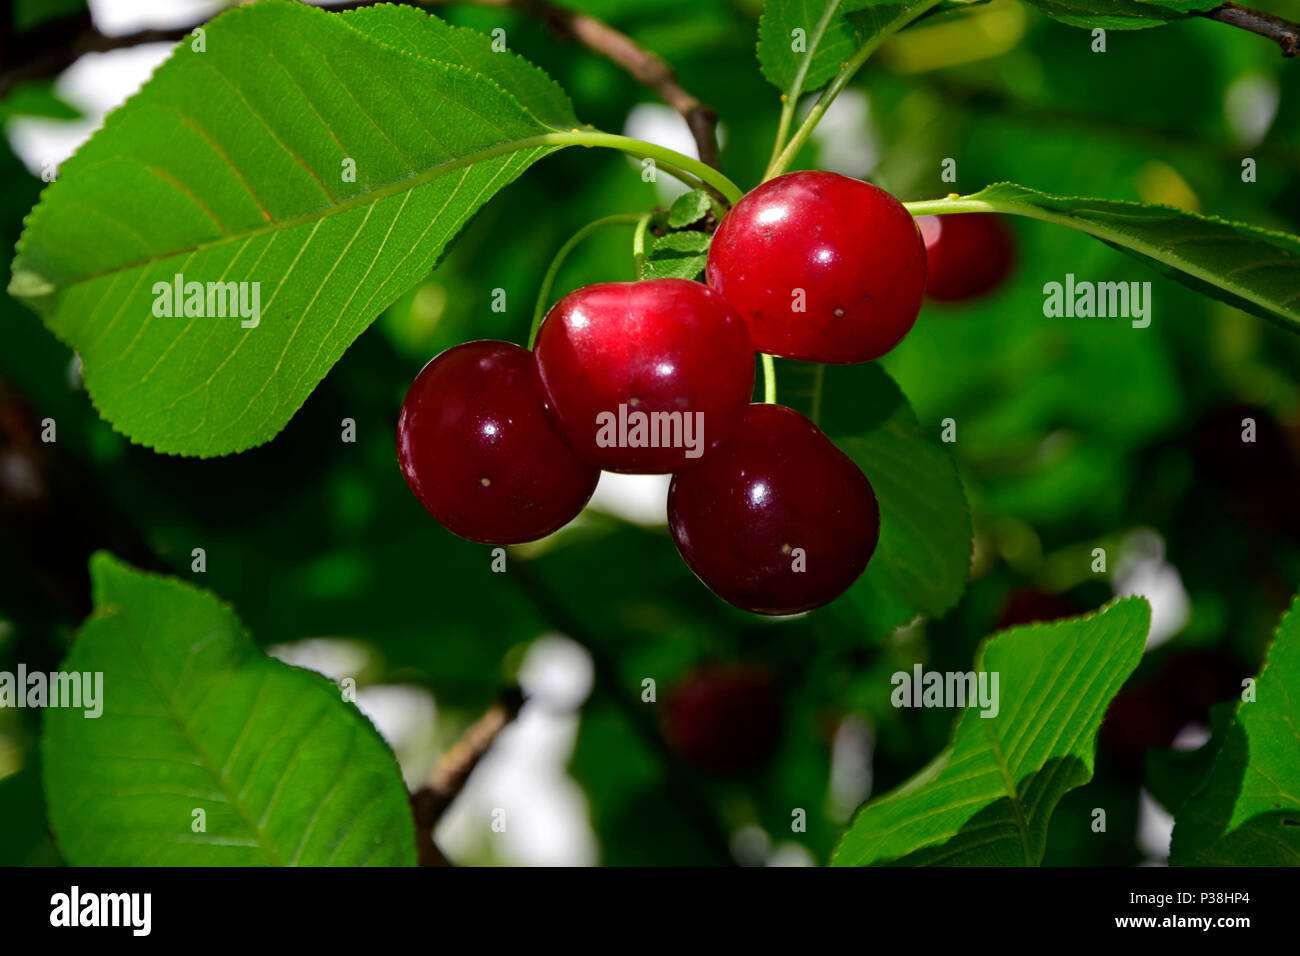 Close-up on a cluster of ripe, shiny sour cherries, hanging on a twig, translucent green leaf, green background Stock Photo